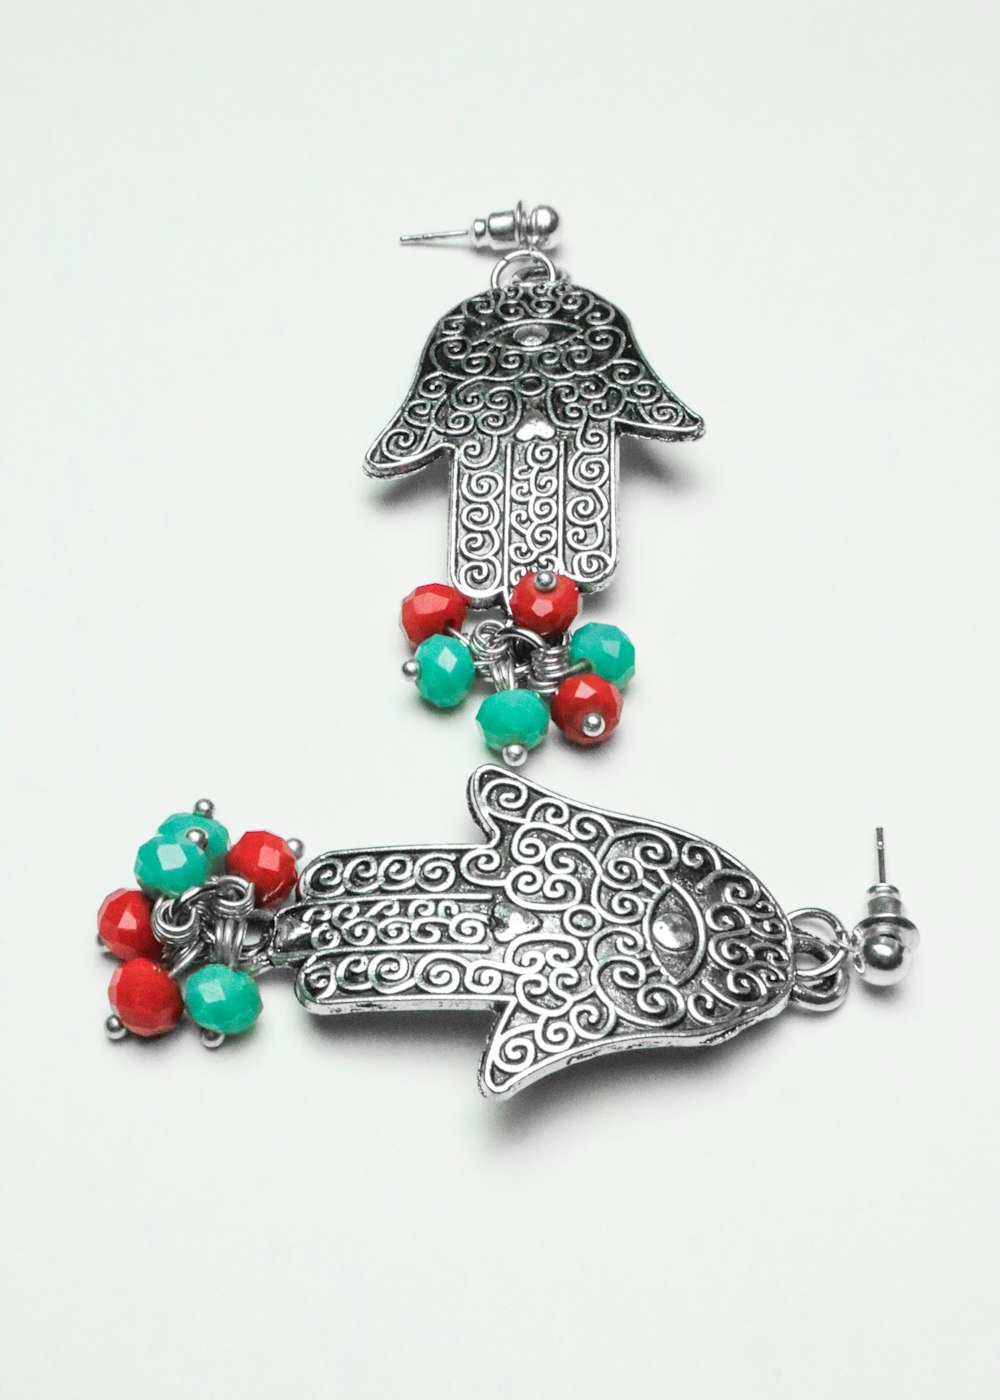 a necklace with a bird and beads on it